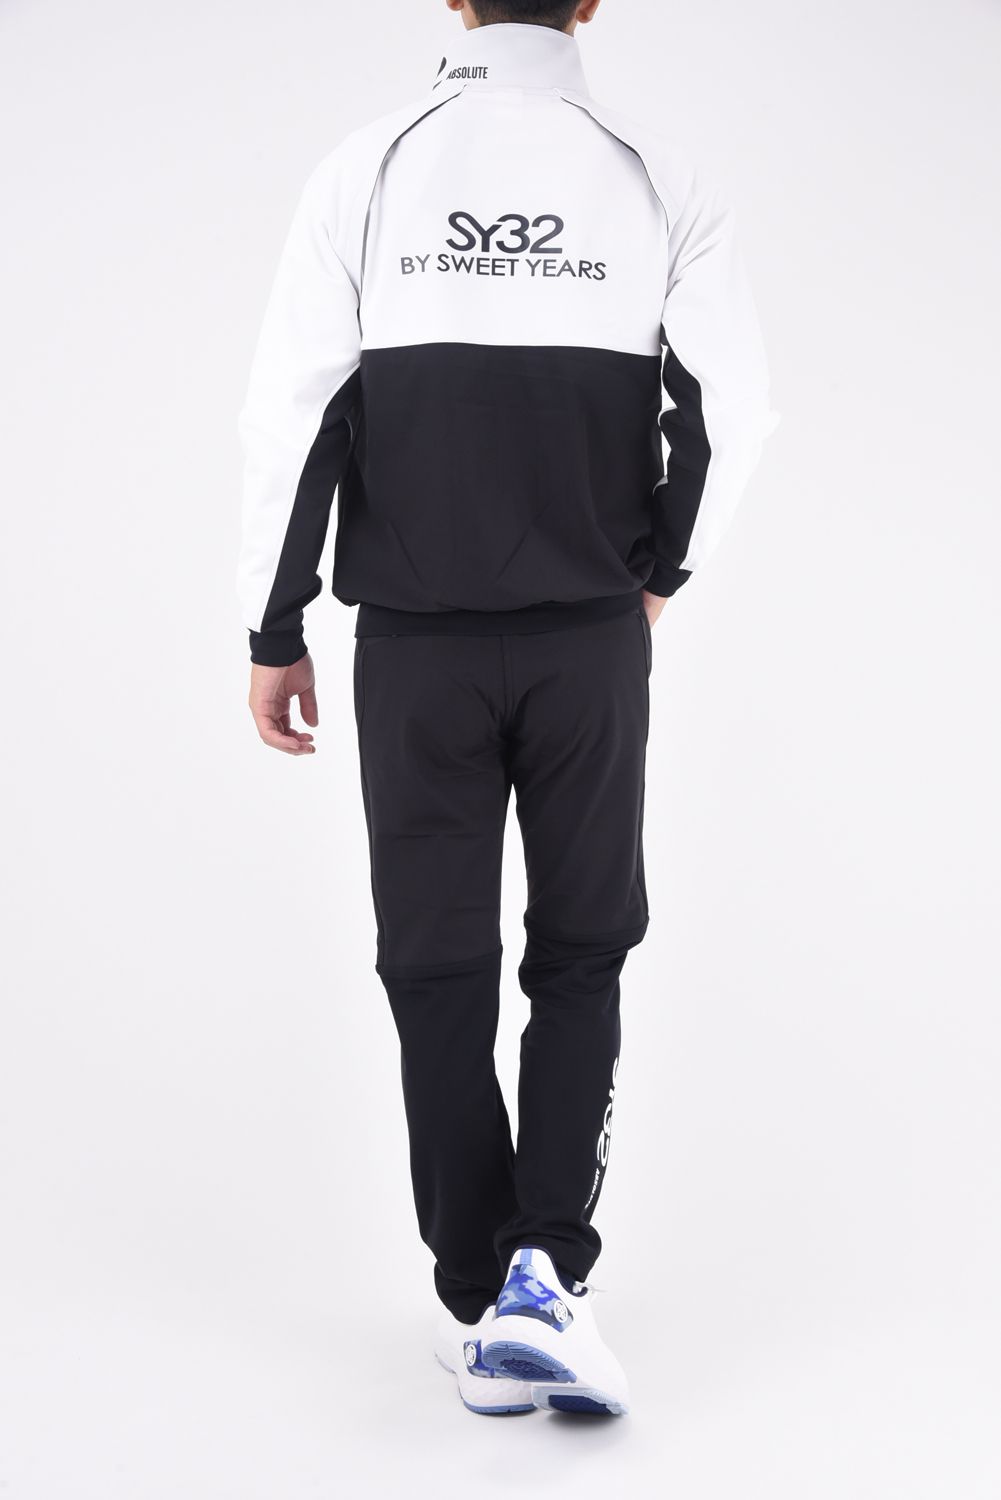 SY32 by SWEET YEARS GOLF - 【ABSOLUTE】 VUELTA SWEAT PANTS / ロゴ